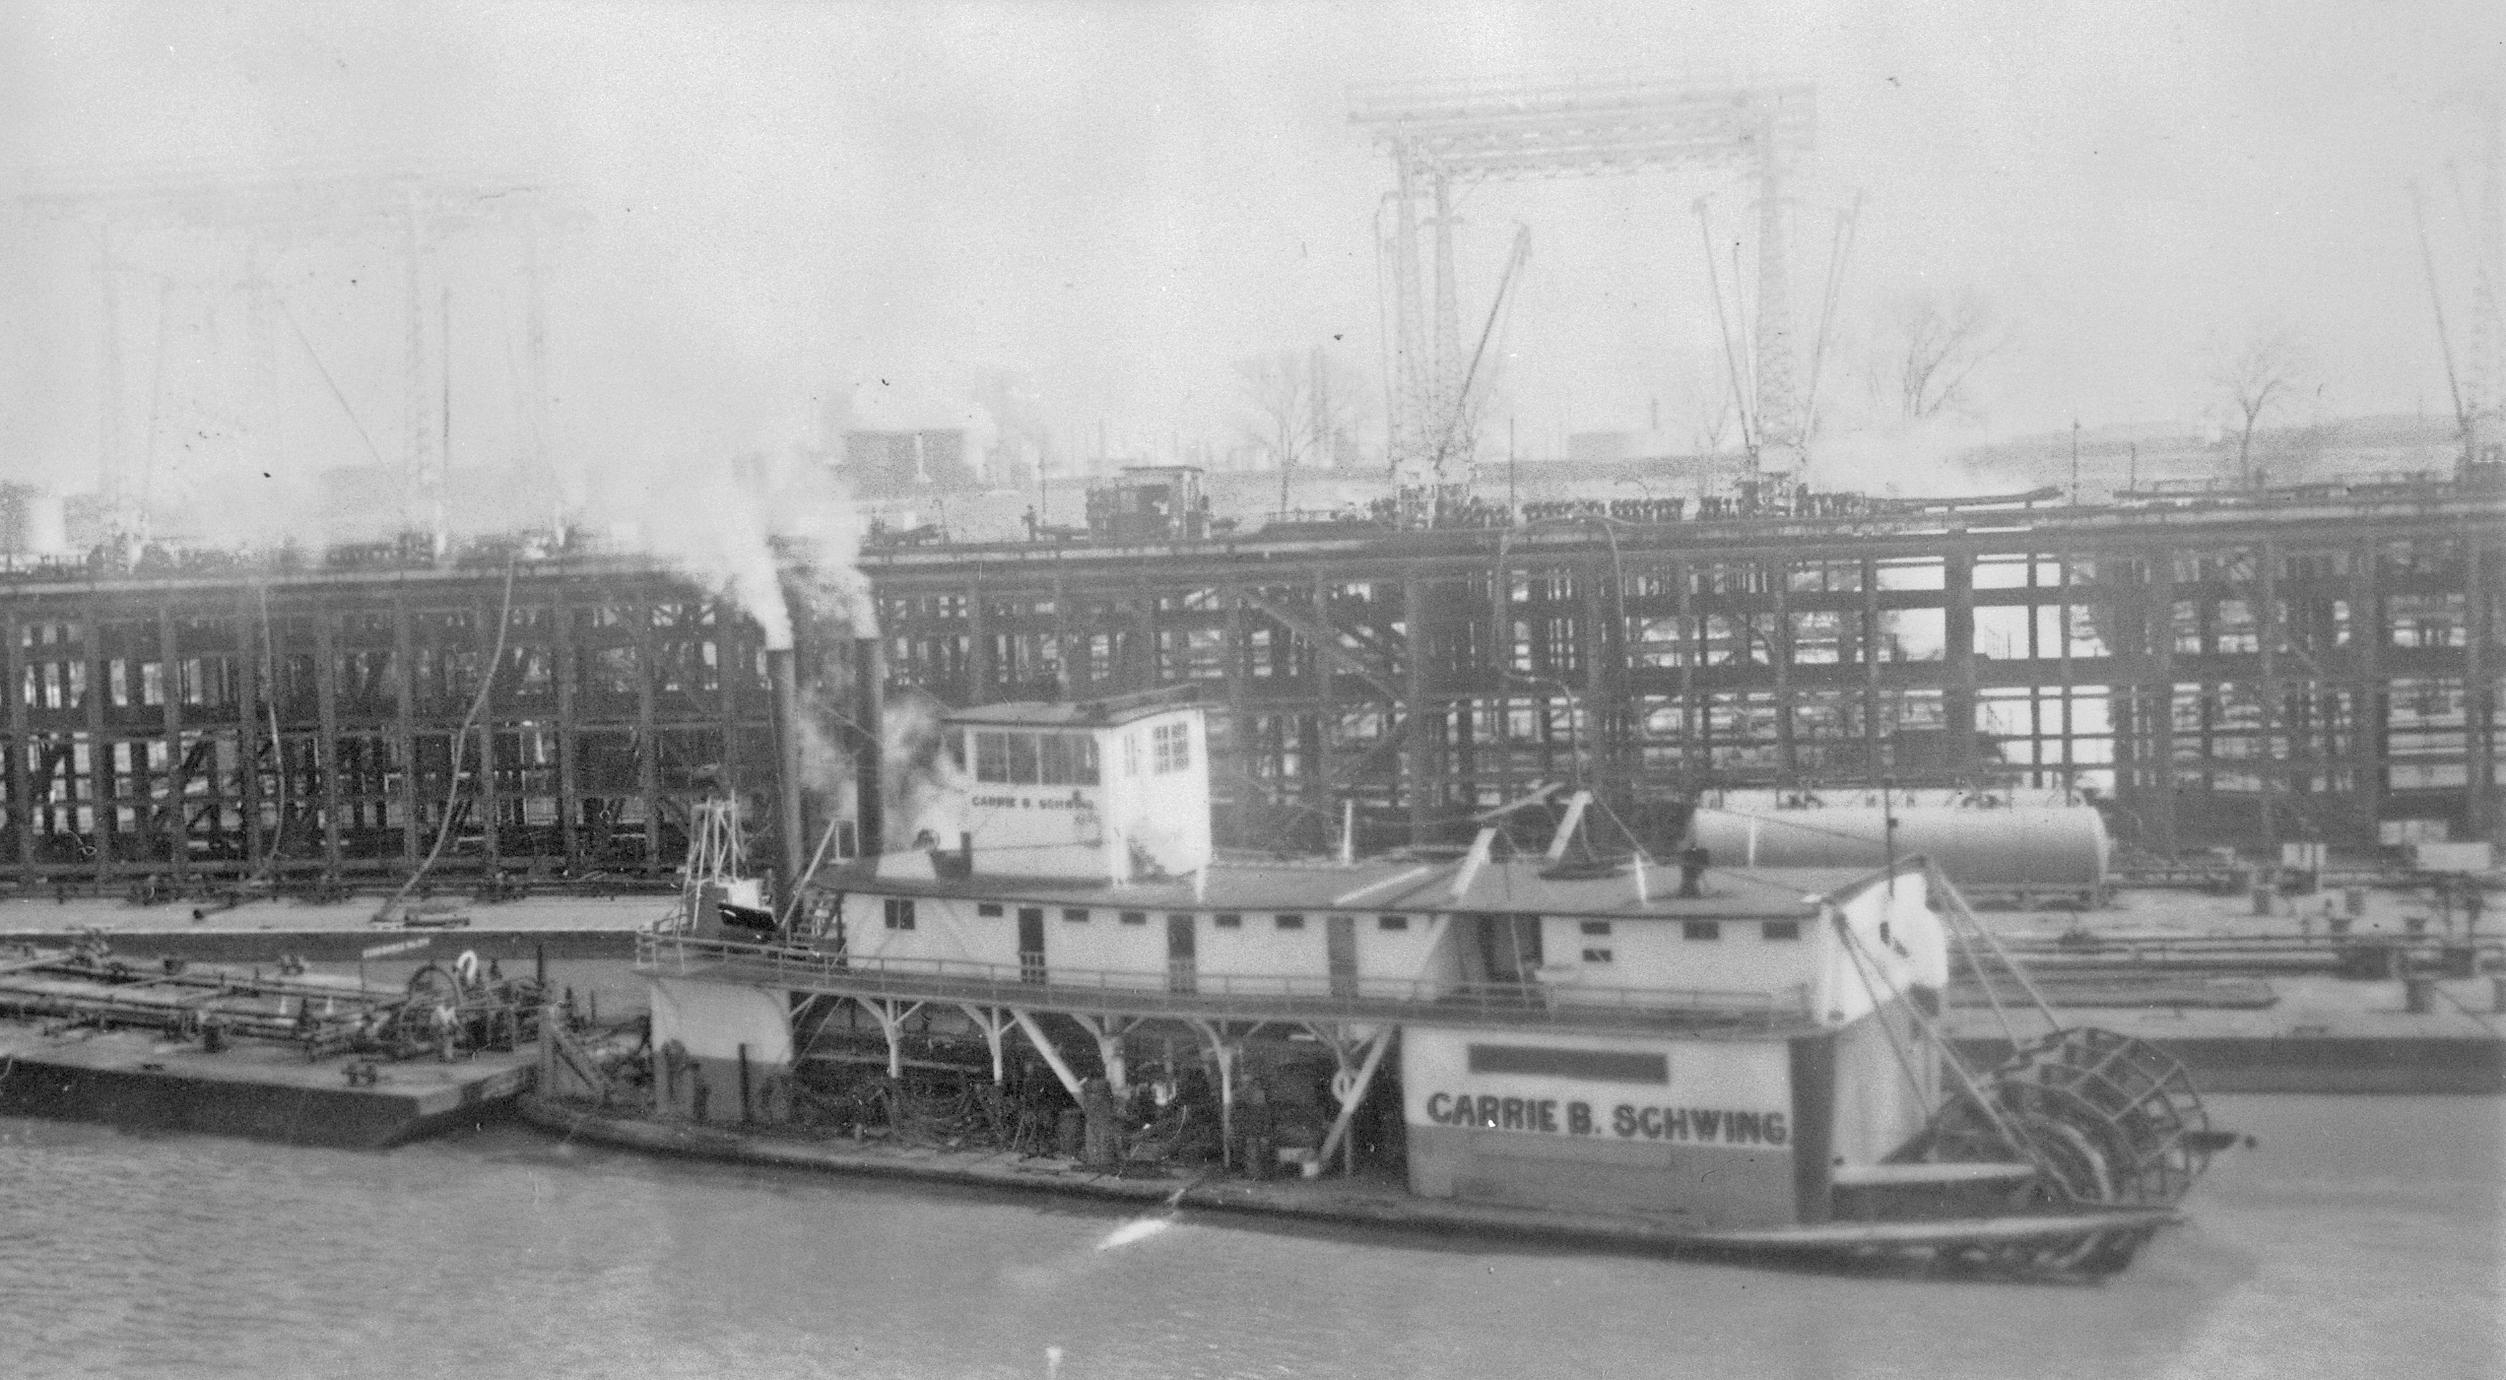 Carrie B. Schwing (Packet/Towboat, 1912-1946)